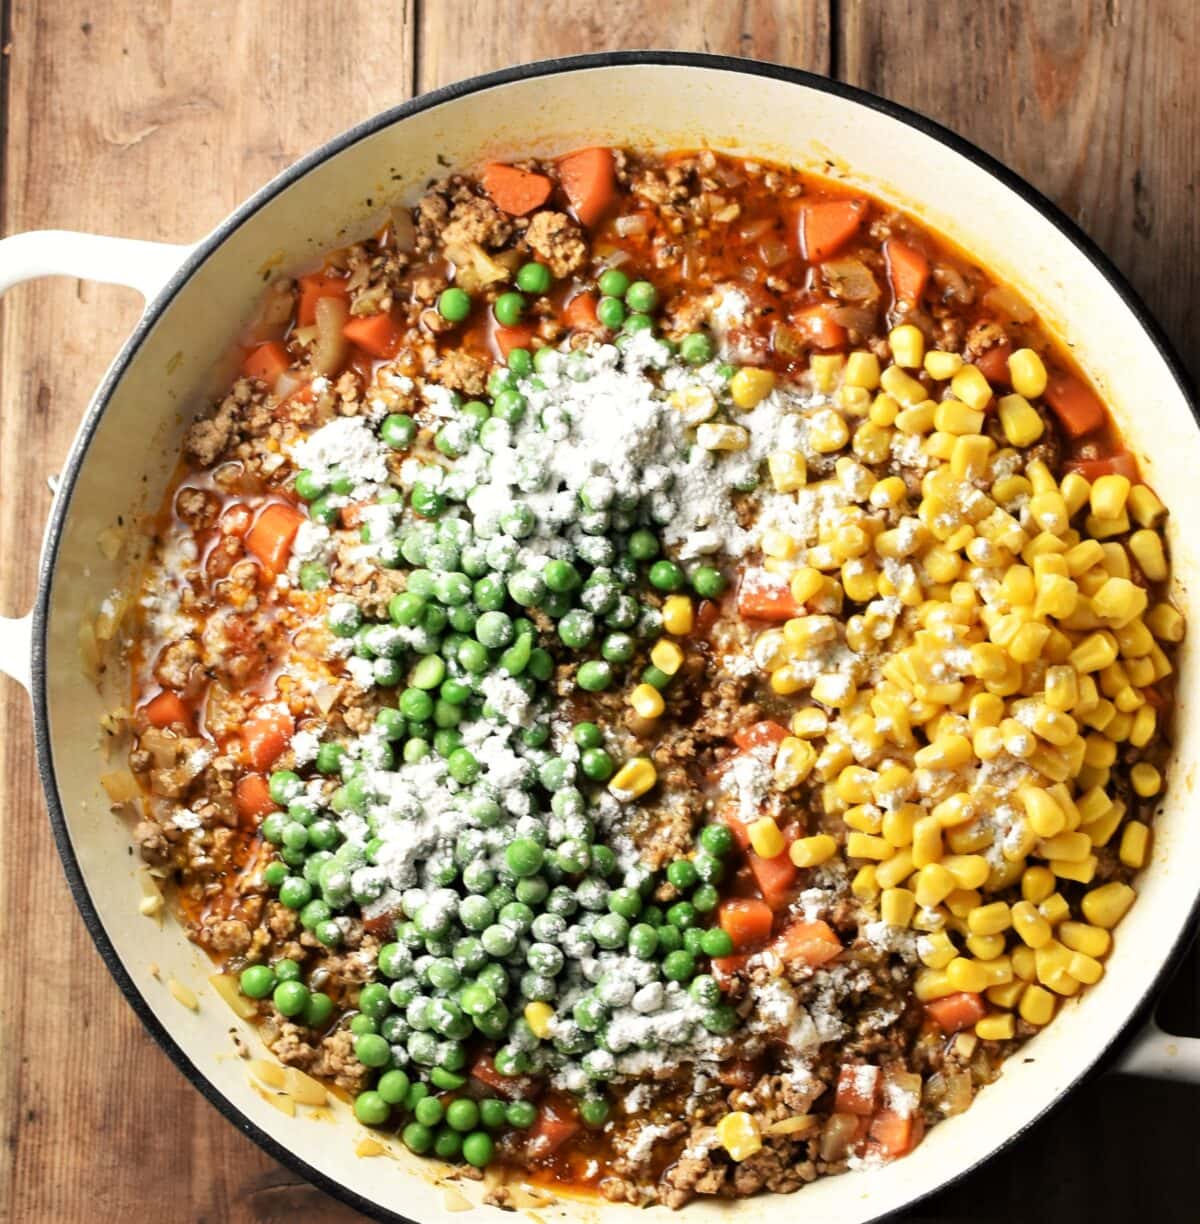 Turkey mince in sauce with corn, carrots, peas and flour over the top on large white shallow dish.